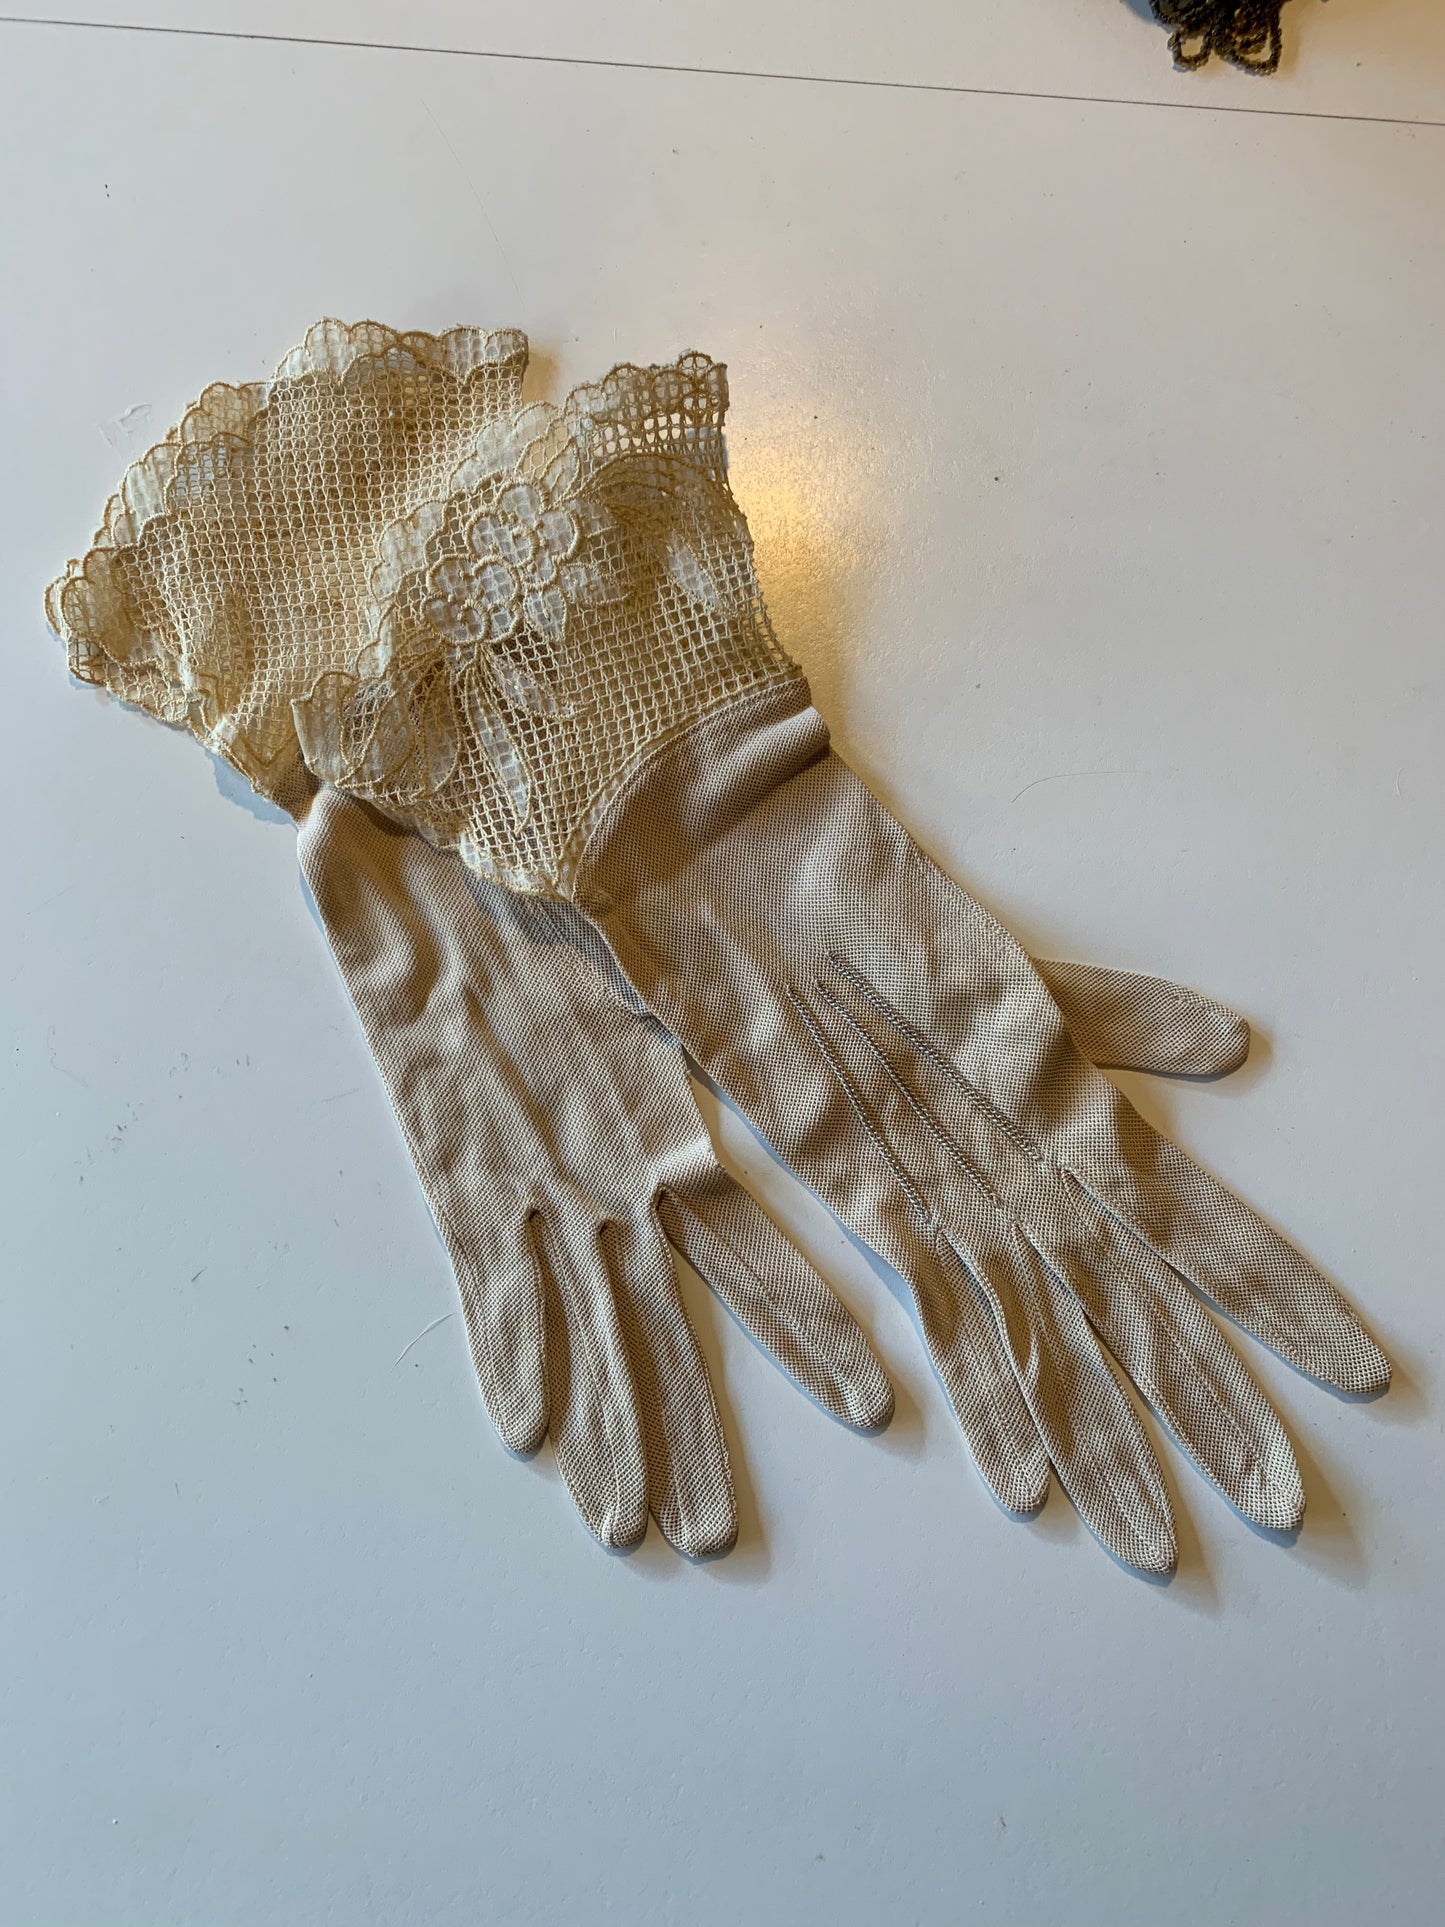 Ivory Jersey Mesh Gloves with Floral Fabric Appliqued Tatted Lace Wide Cuffs circa 1890s